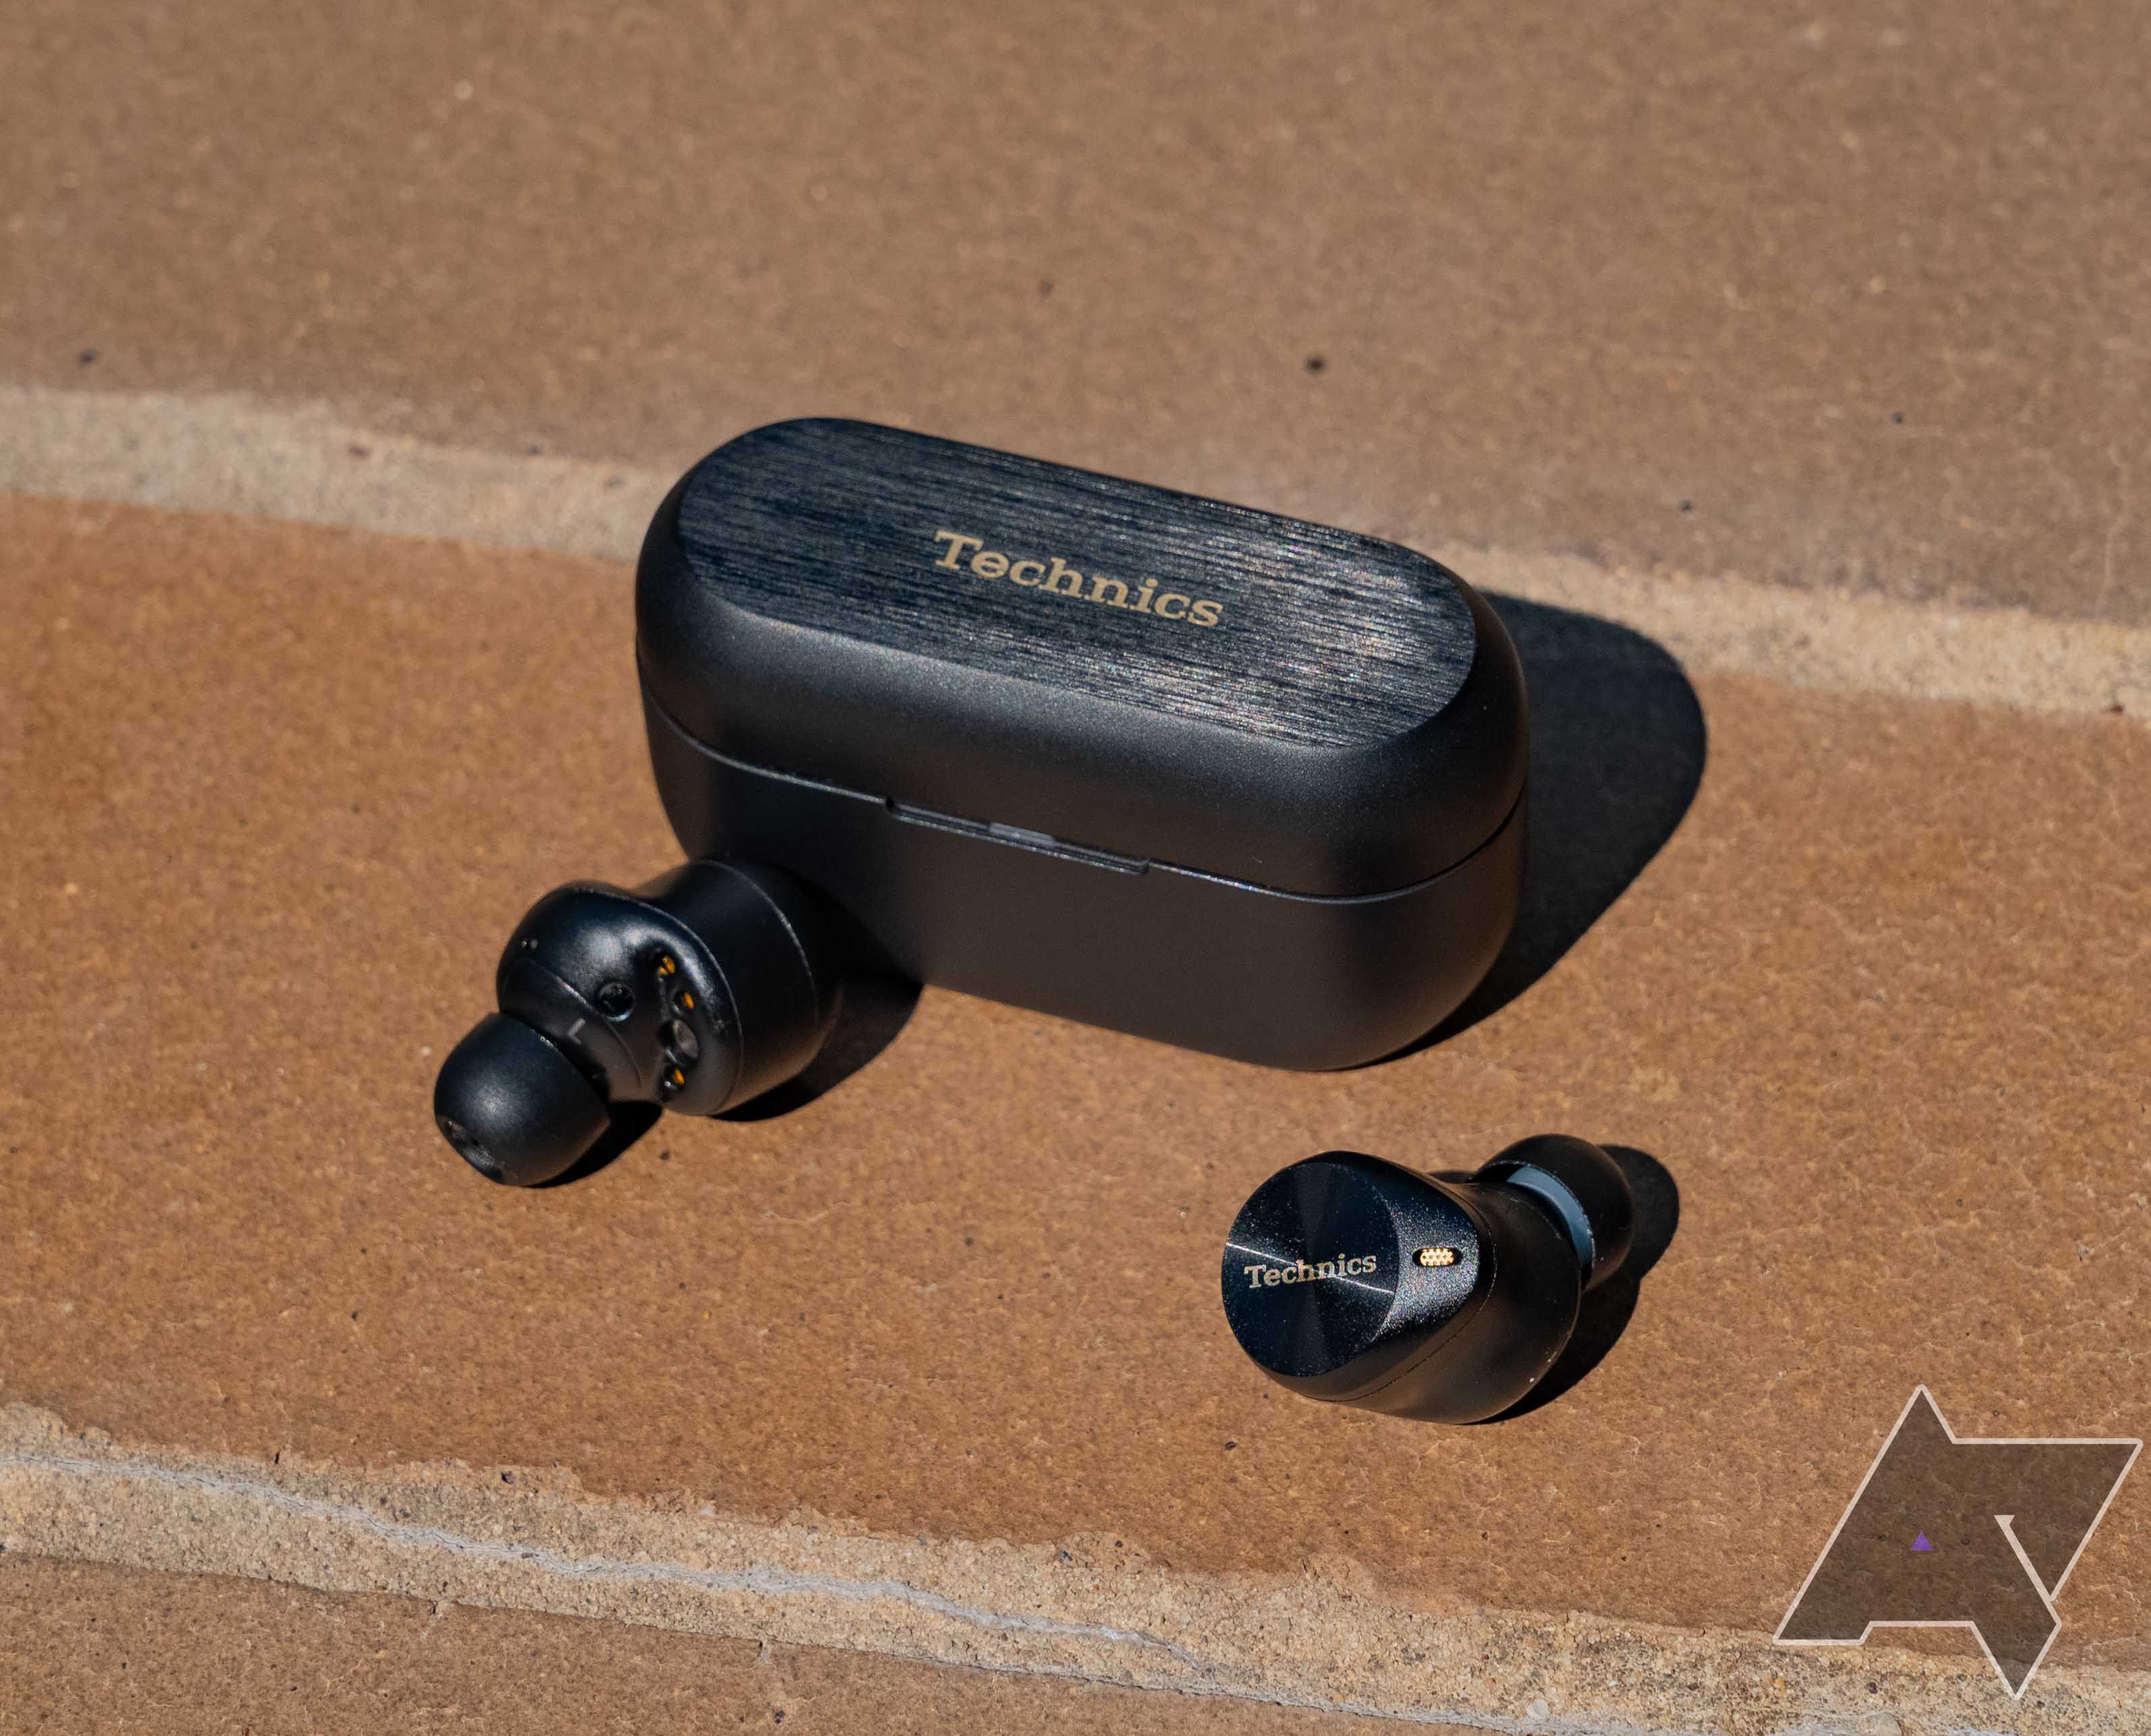 The Technics AZ80 earbuds sitting on a brick surface in front of the closed charging case